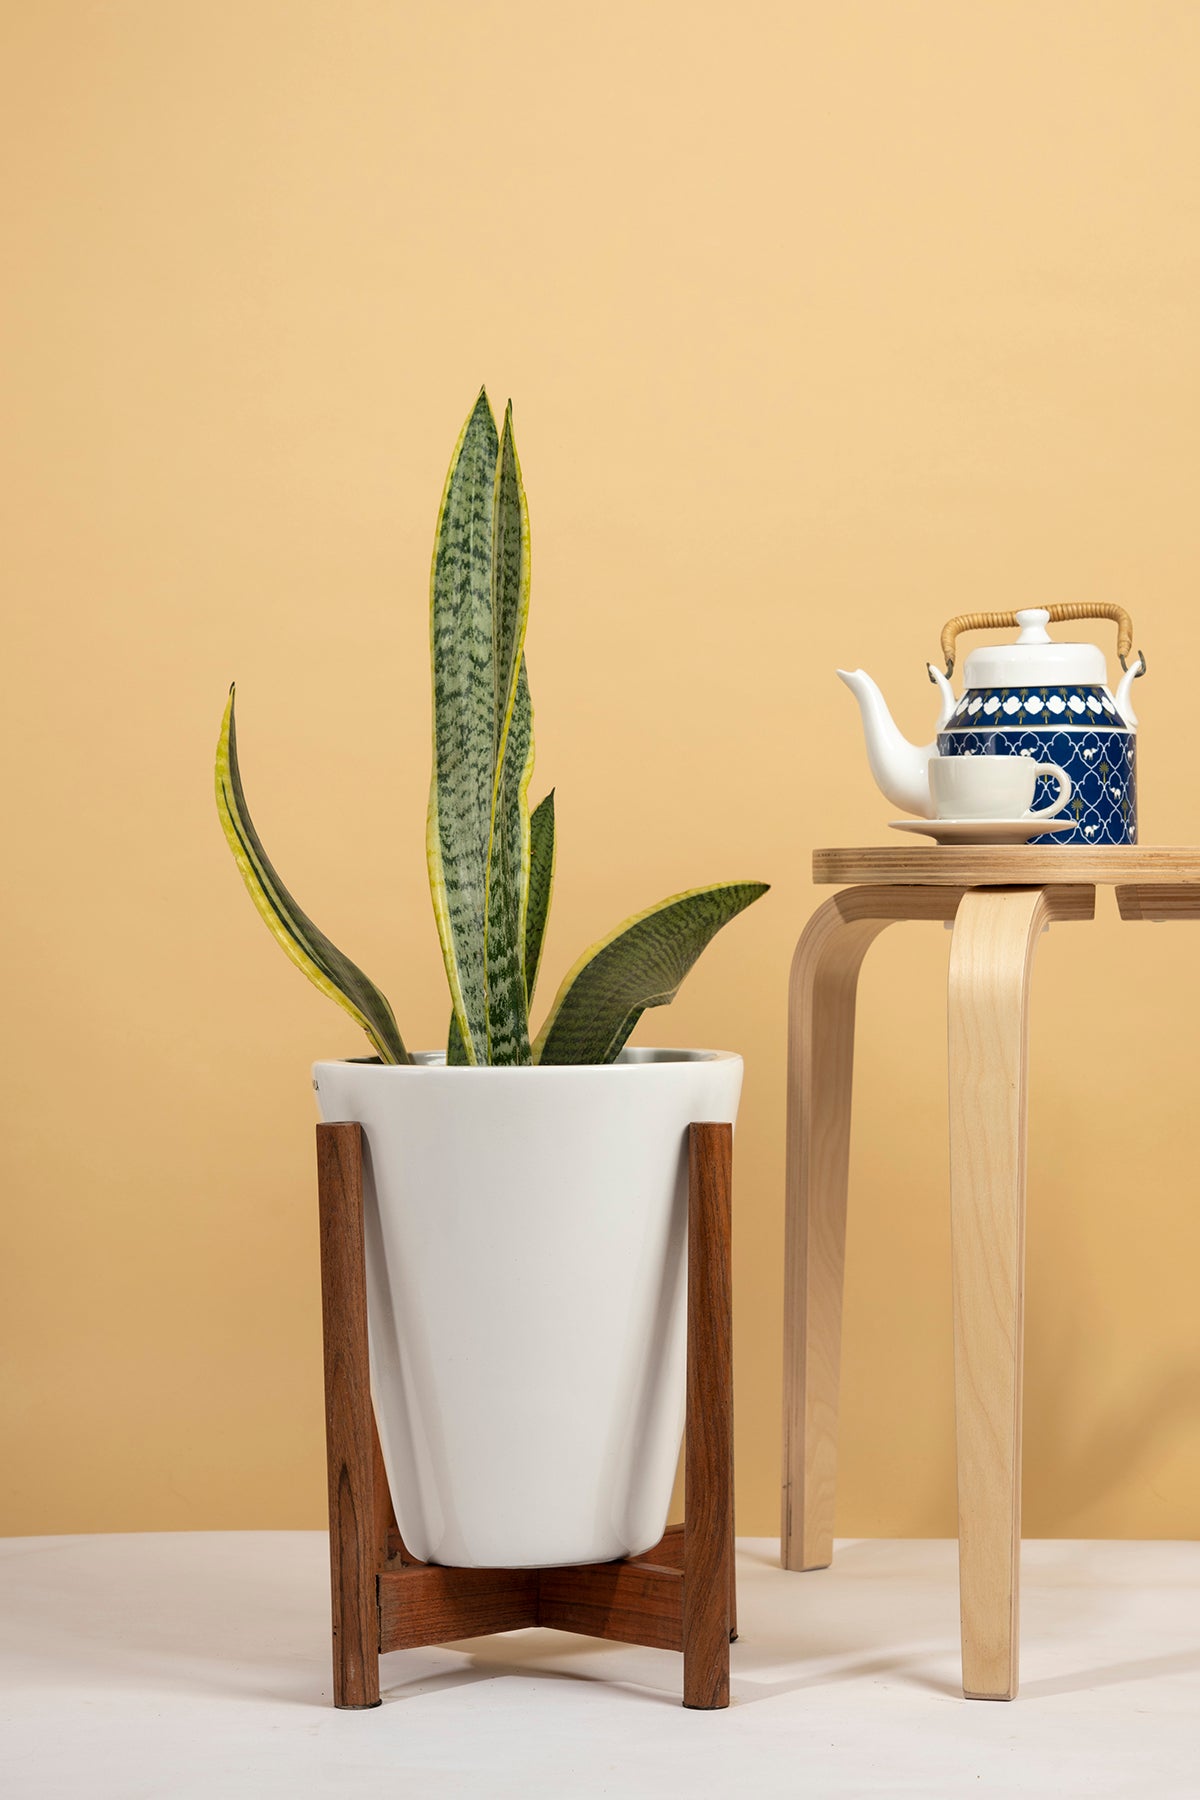 Medium Size Love Bite ceramic planter with wooden stand in white color with snake plant in it.